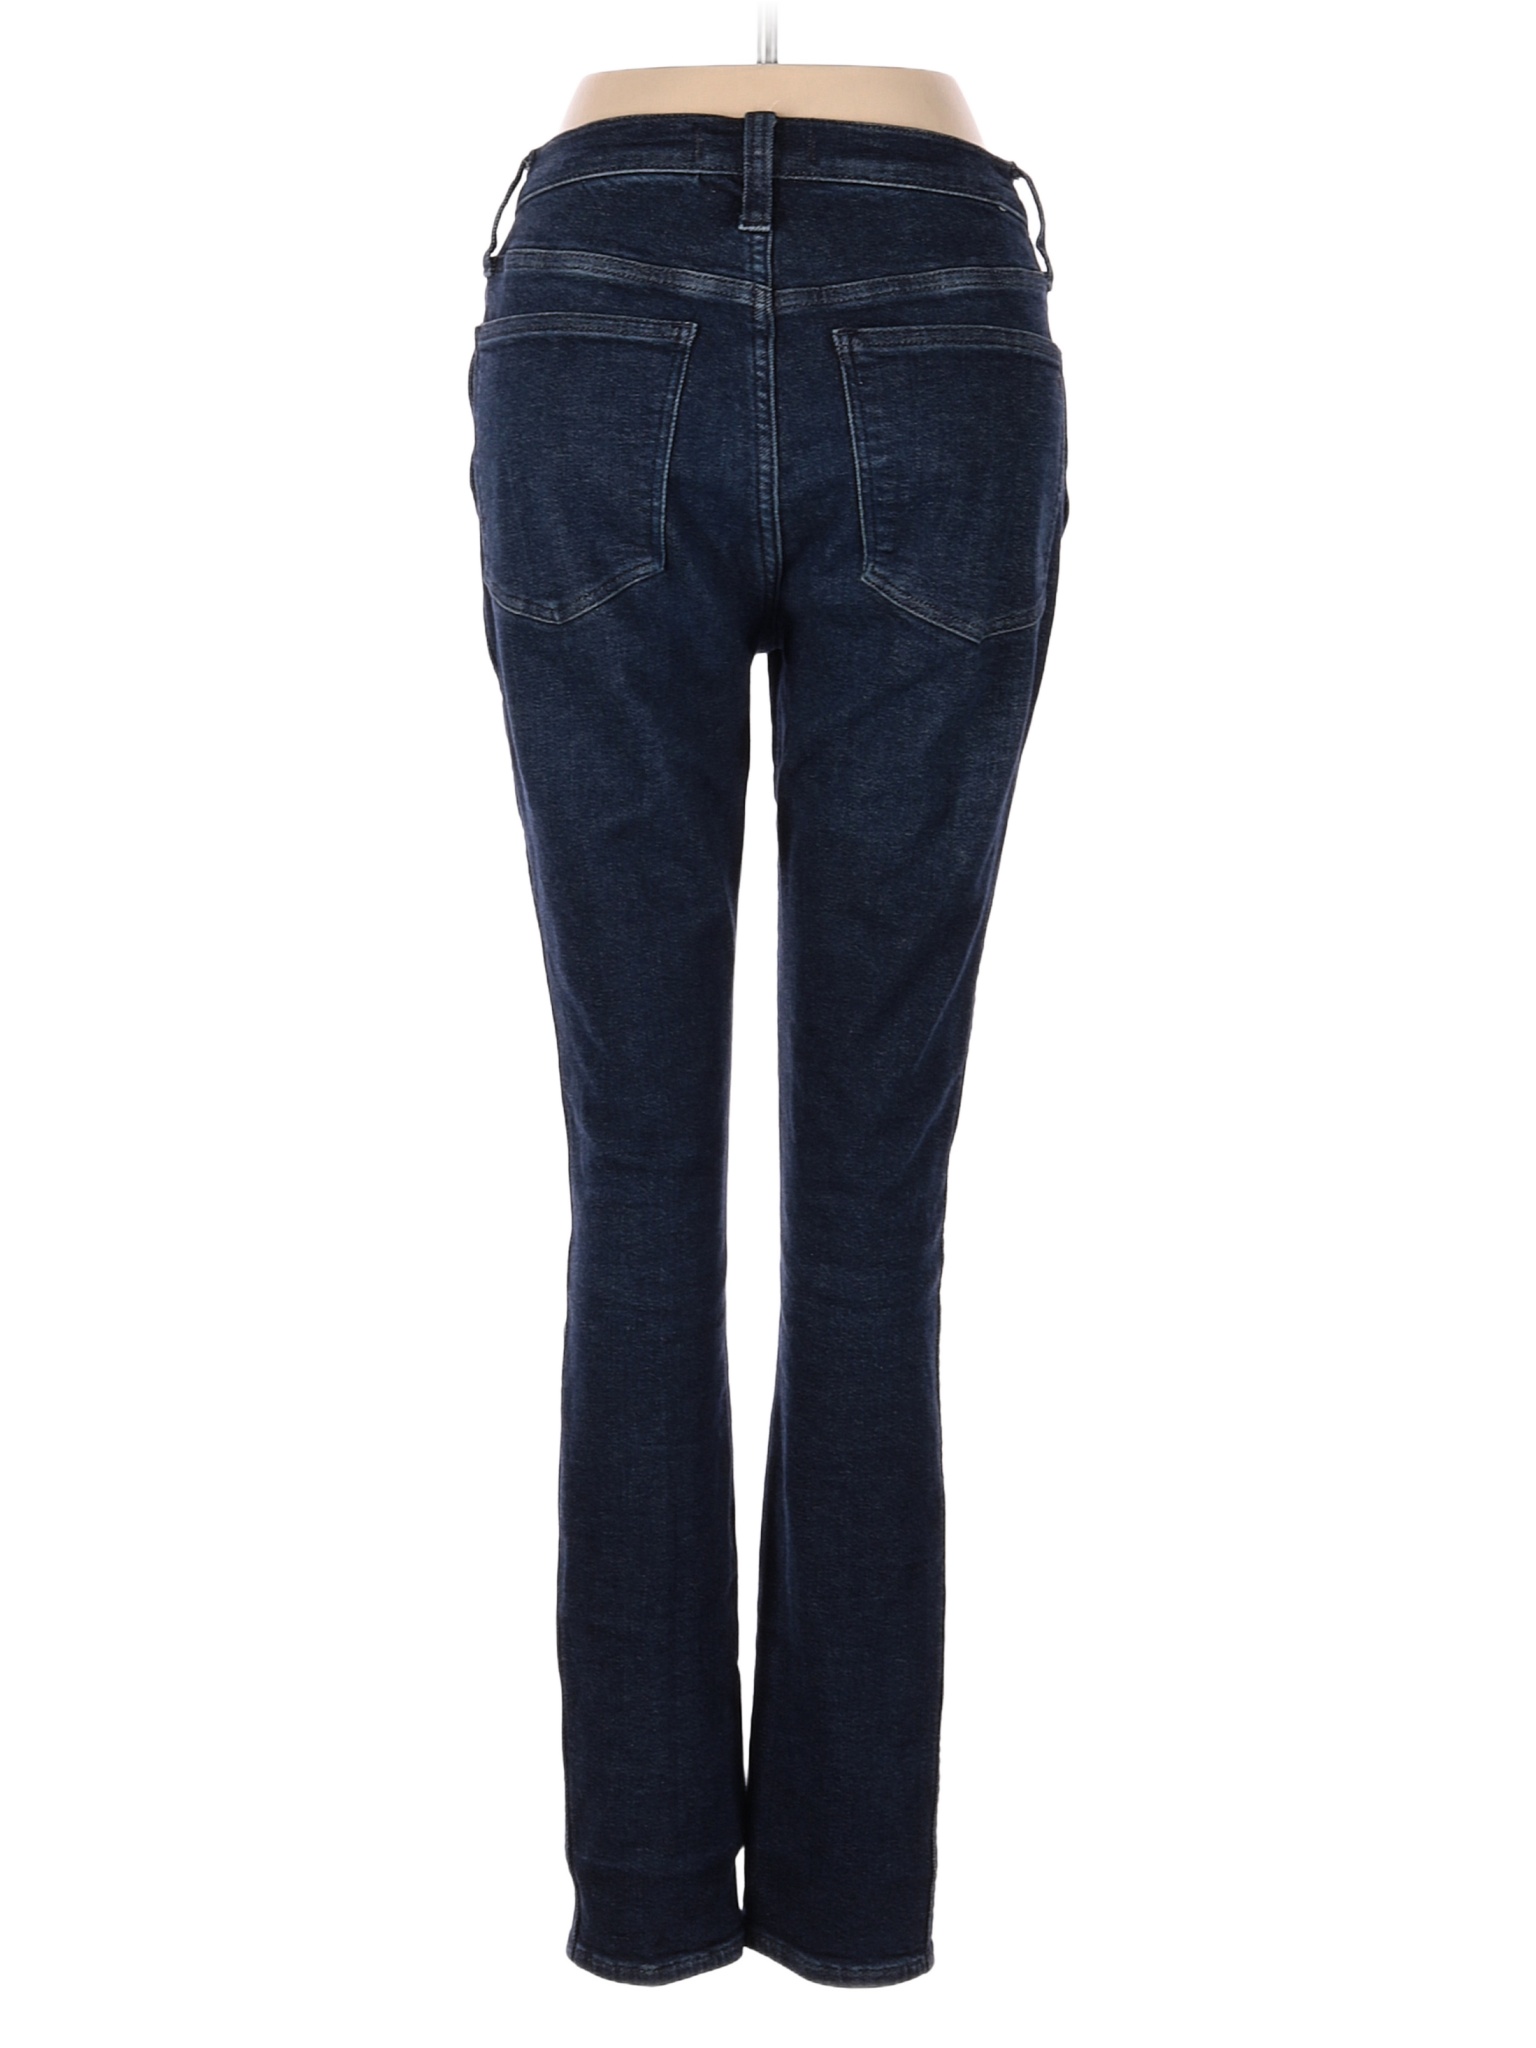 10 High-Rise Skinny Jeans in Bensley Wash